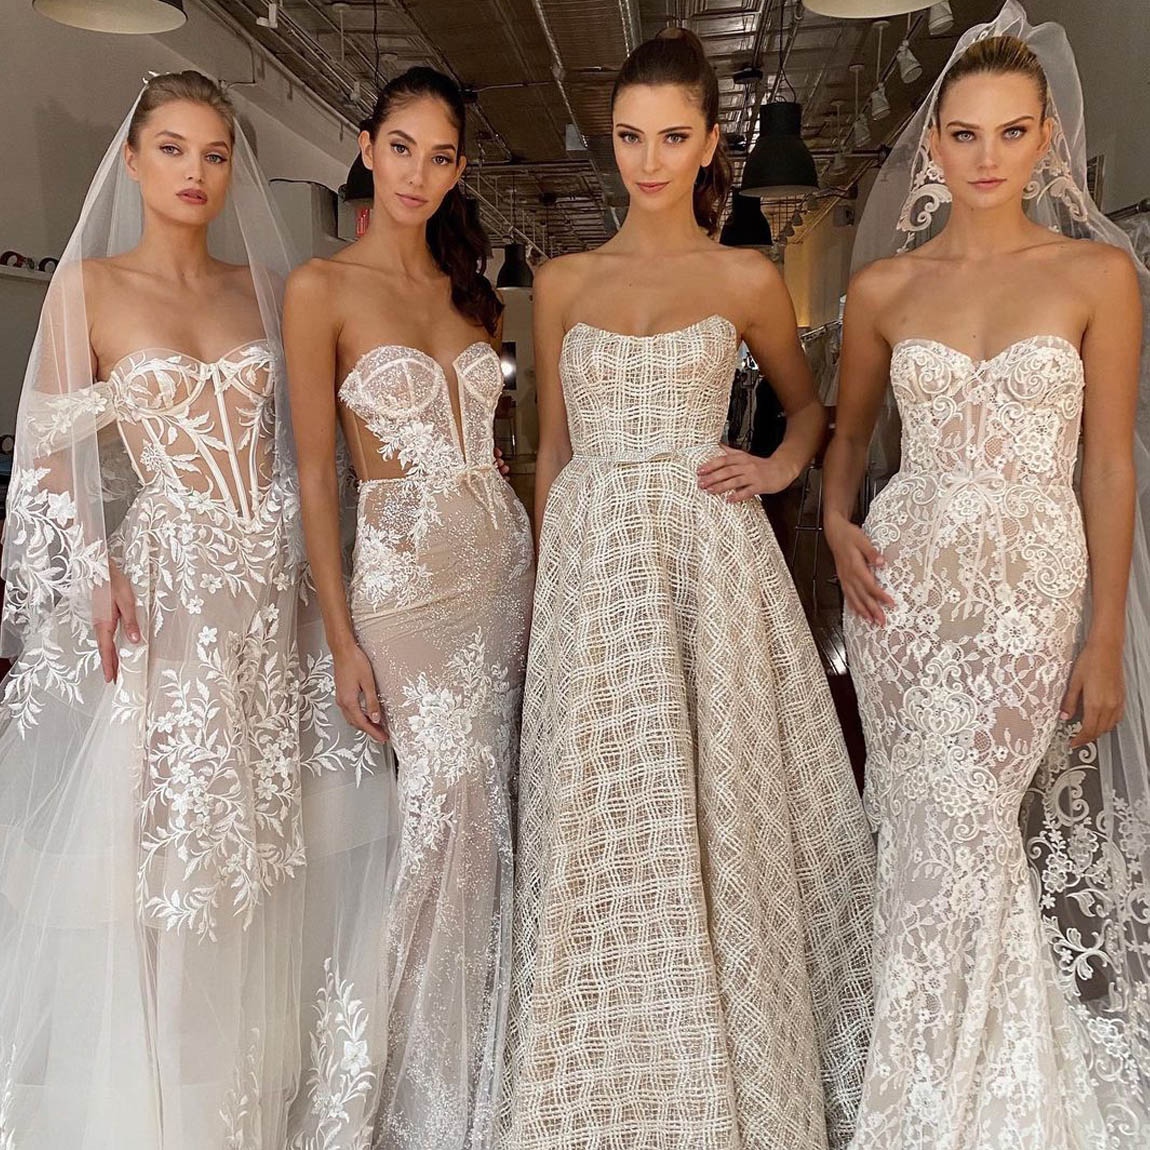 Our Favorite Wedding Dresses From Bridal Fashion Week New York